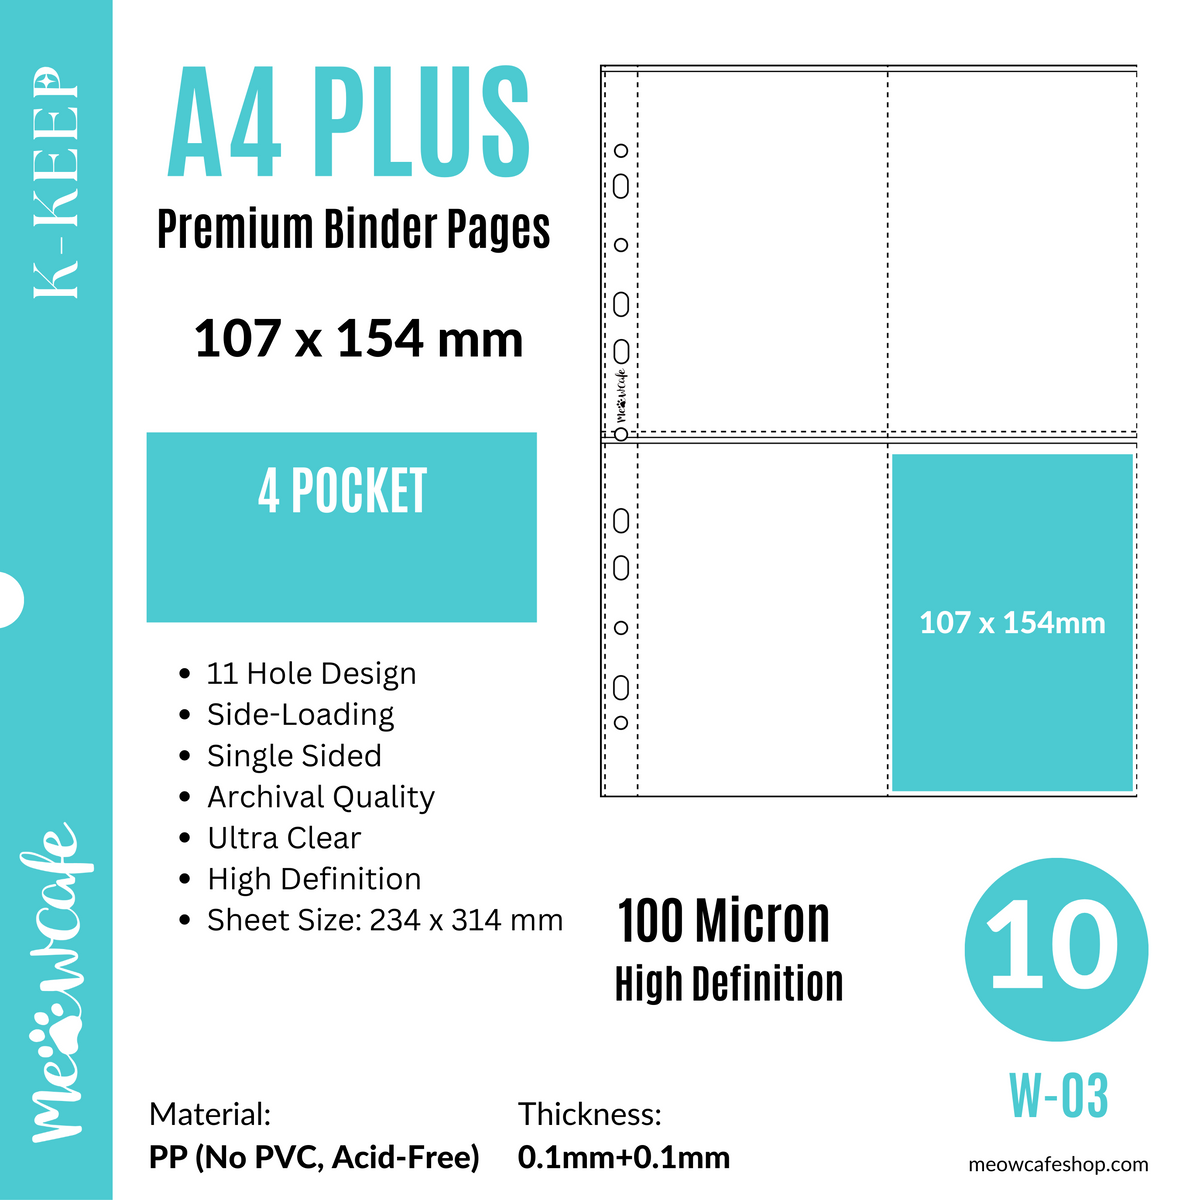 K-KEEP [A4 PLUS] -  4 Pocket (Postcard) - 11 Holes Premium Binder Pages, 100 Micron Thick, High Definition (Pack of 10) - (W-03)